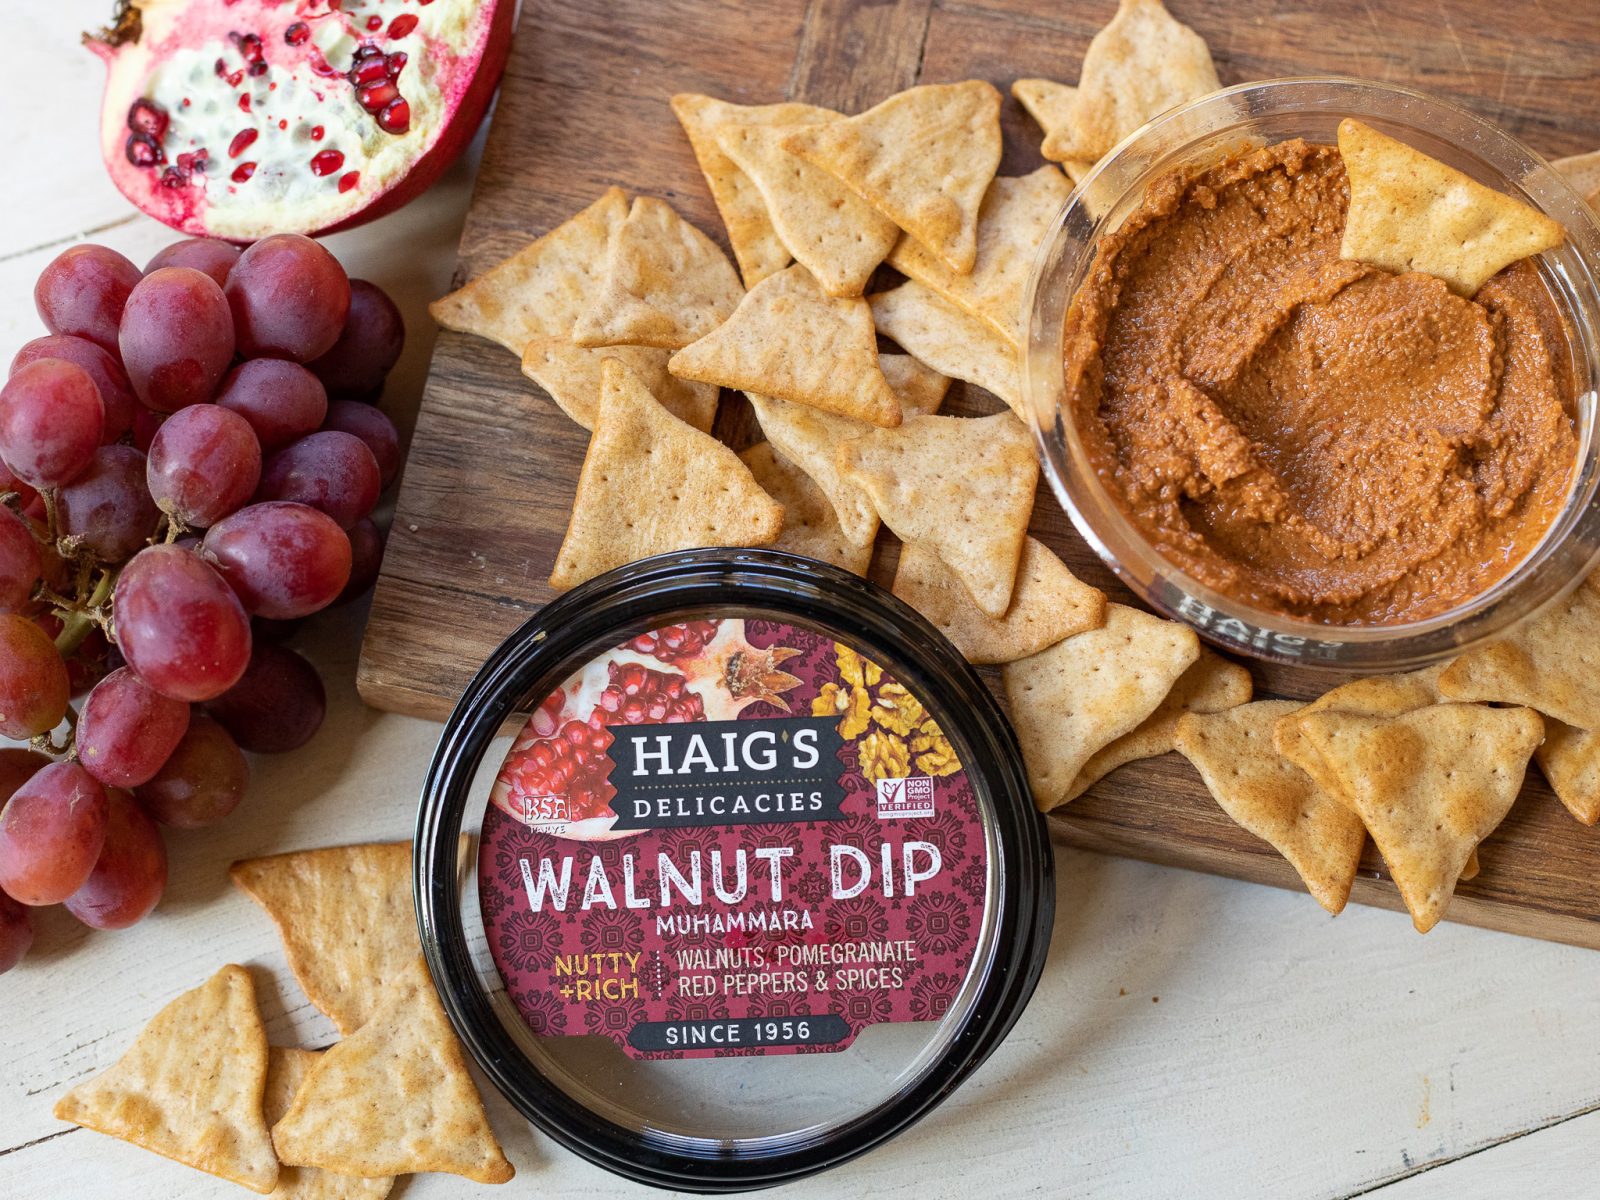 Haig’s Delicacies Walnut Dip Or Baba Ghannouge As Low As 50¢ At Publix